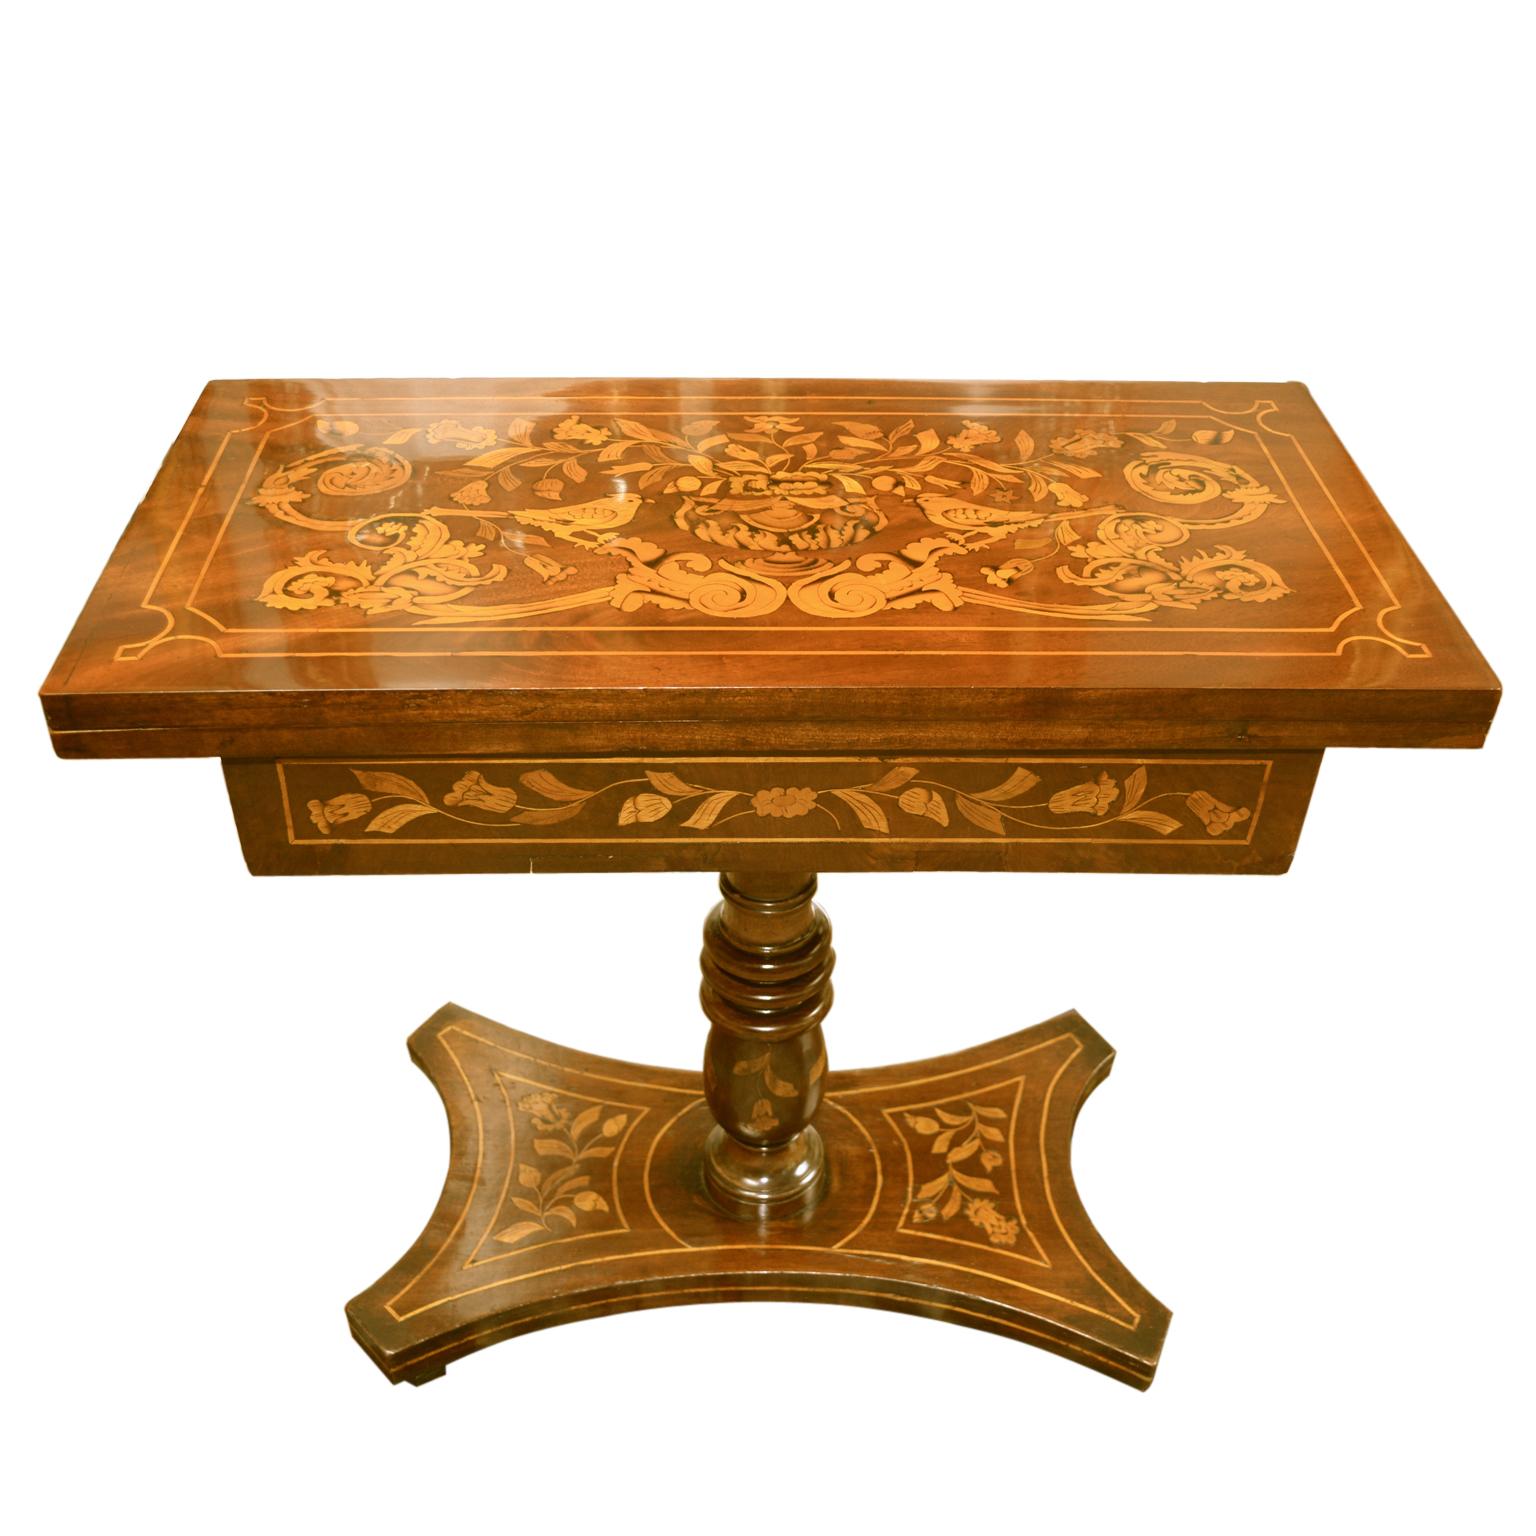 Dutch Colonial 19th Century Dutch Marquetry Games Table For Sale